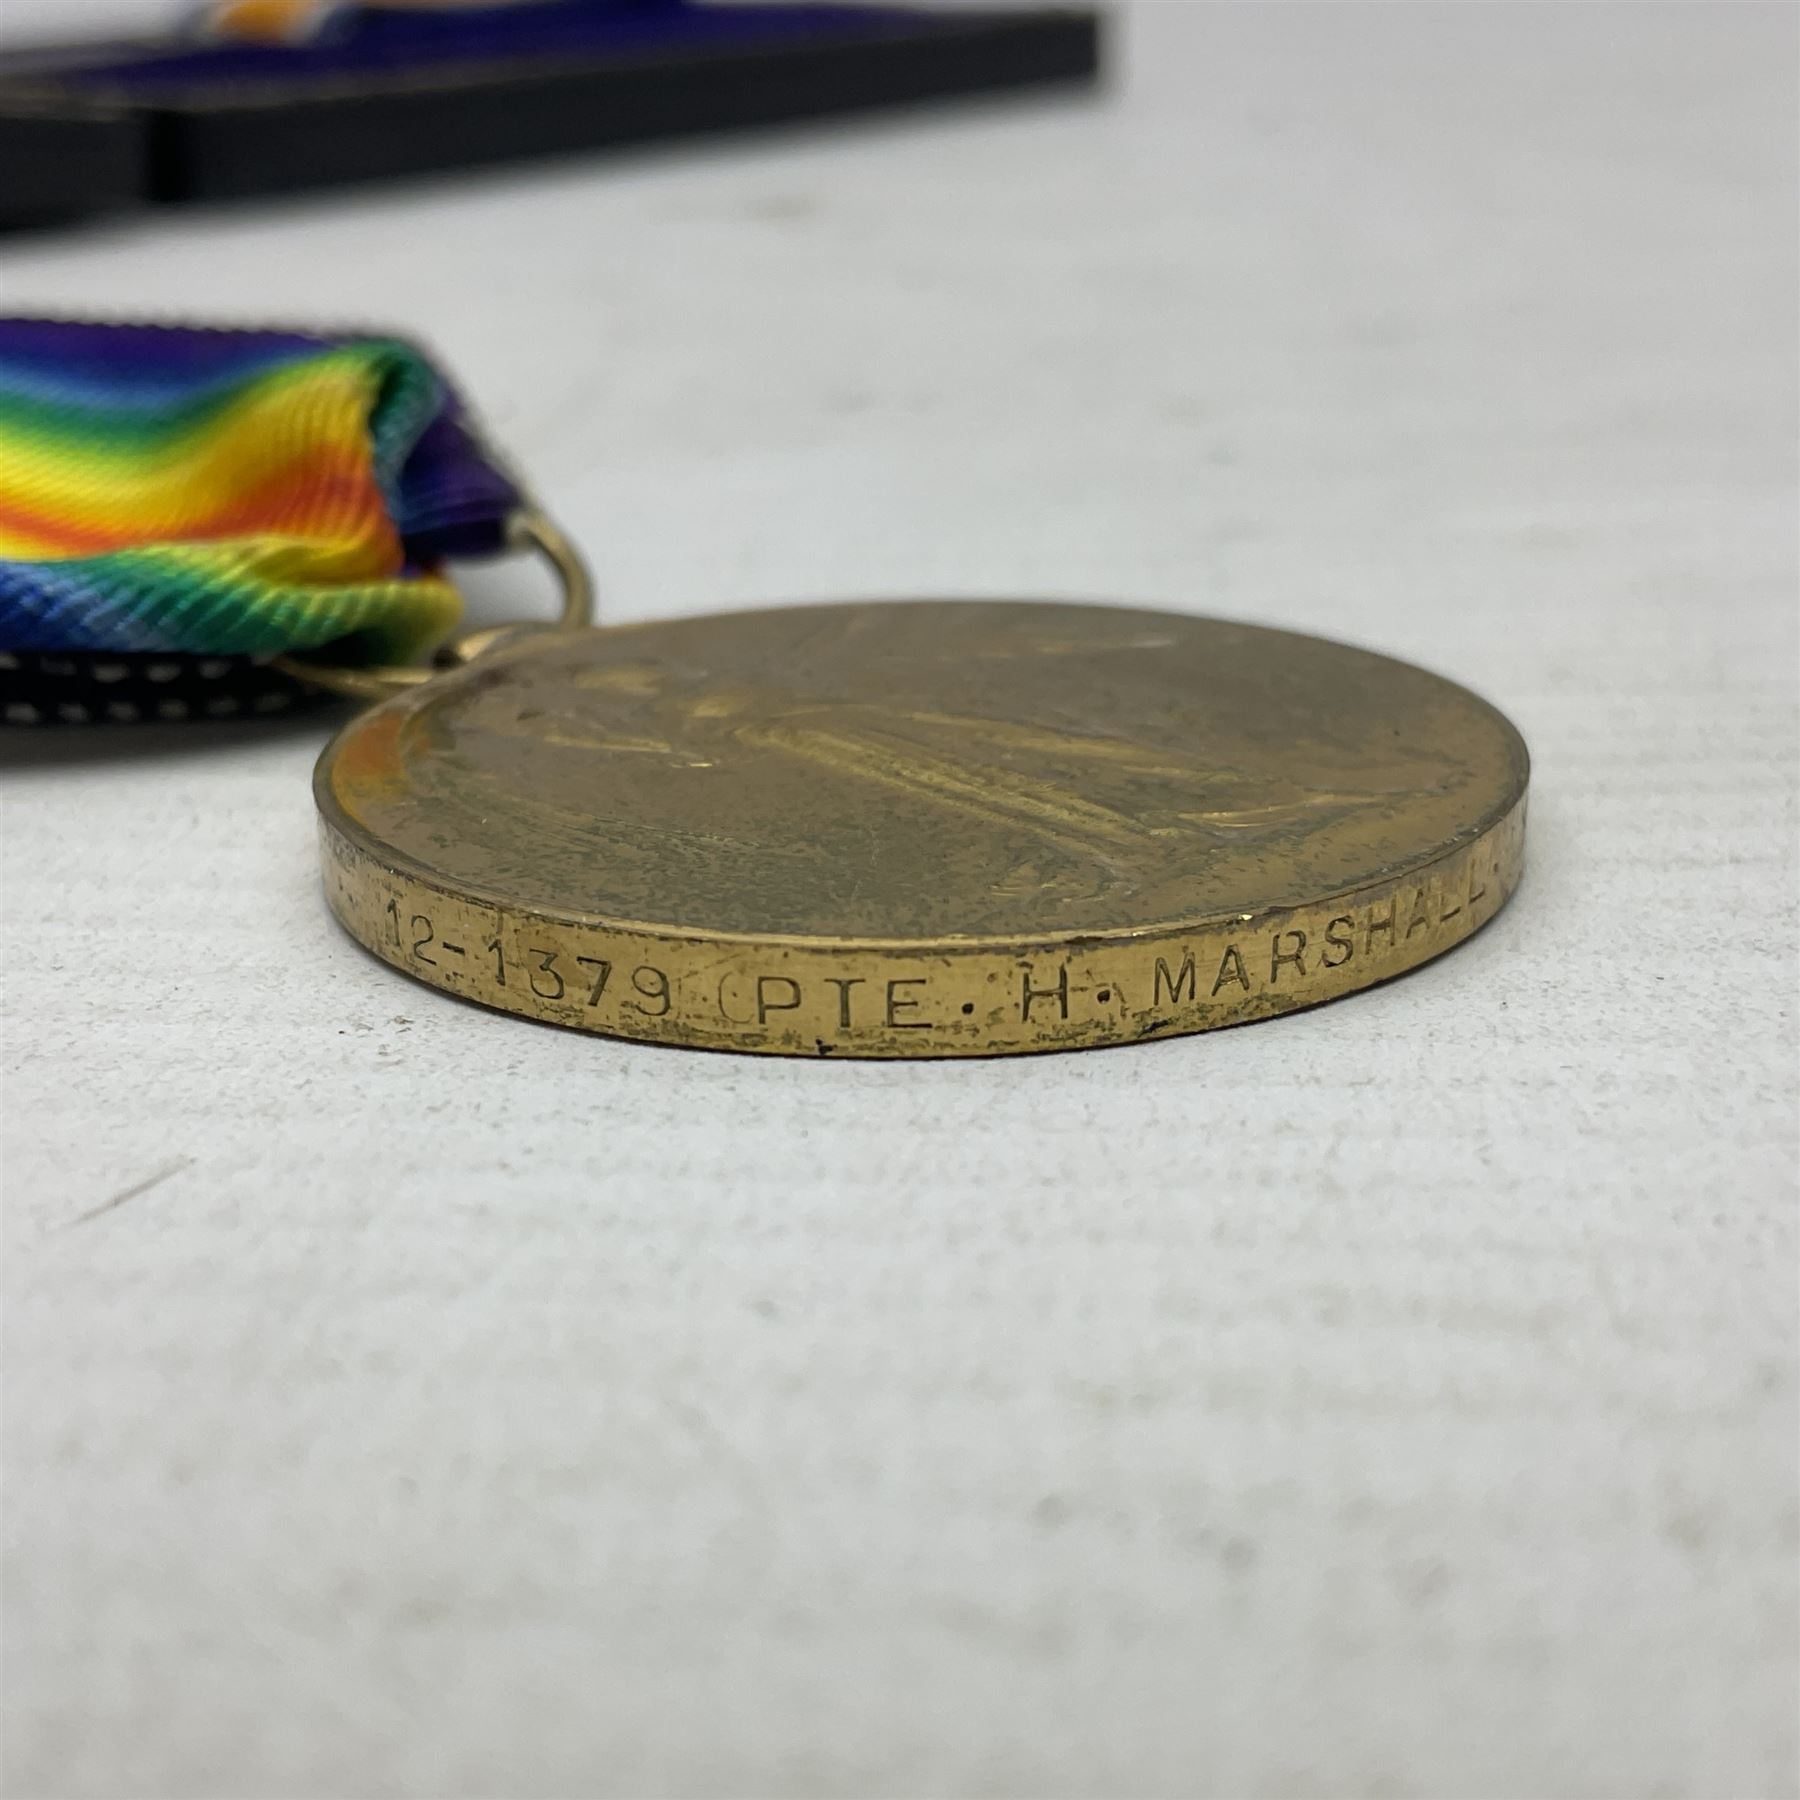 WWI pair of medals comprising British War Medal and Victory Medal awarded to 12-1379 Pte. H. Marshal - Image 14 of 18